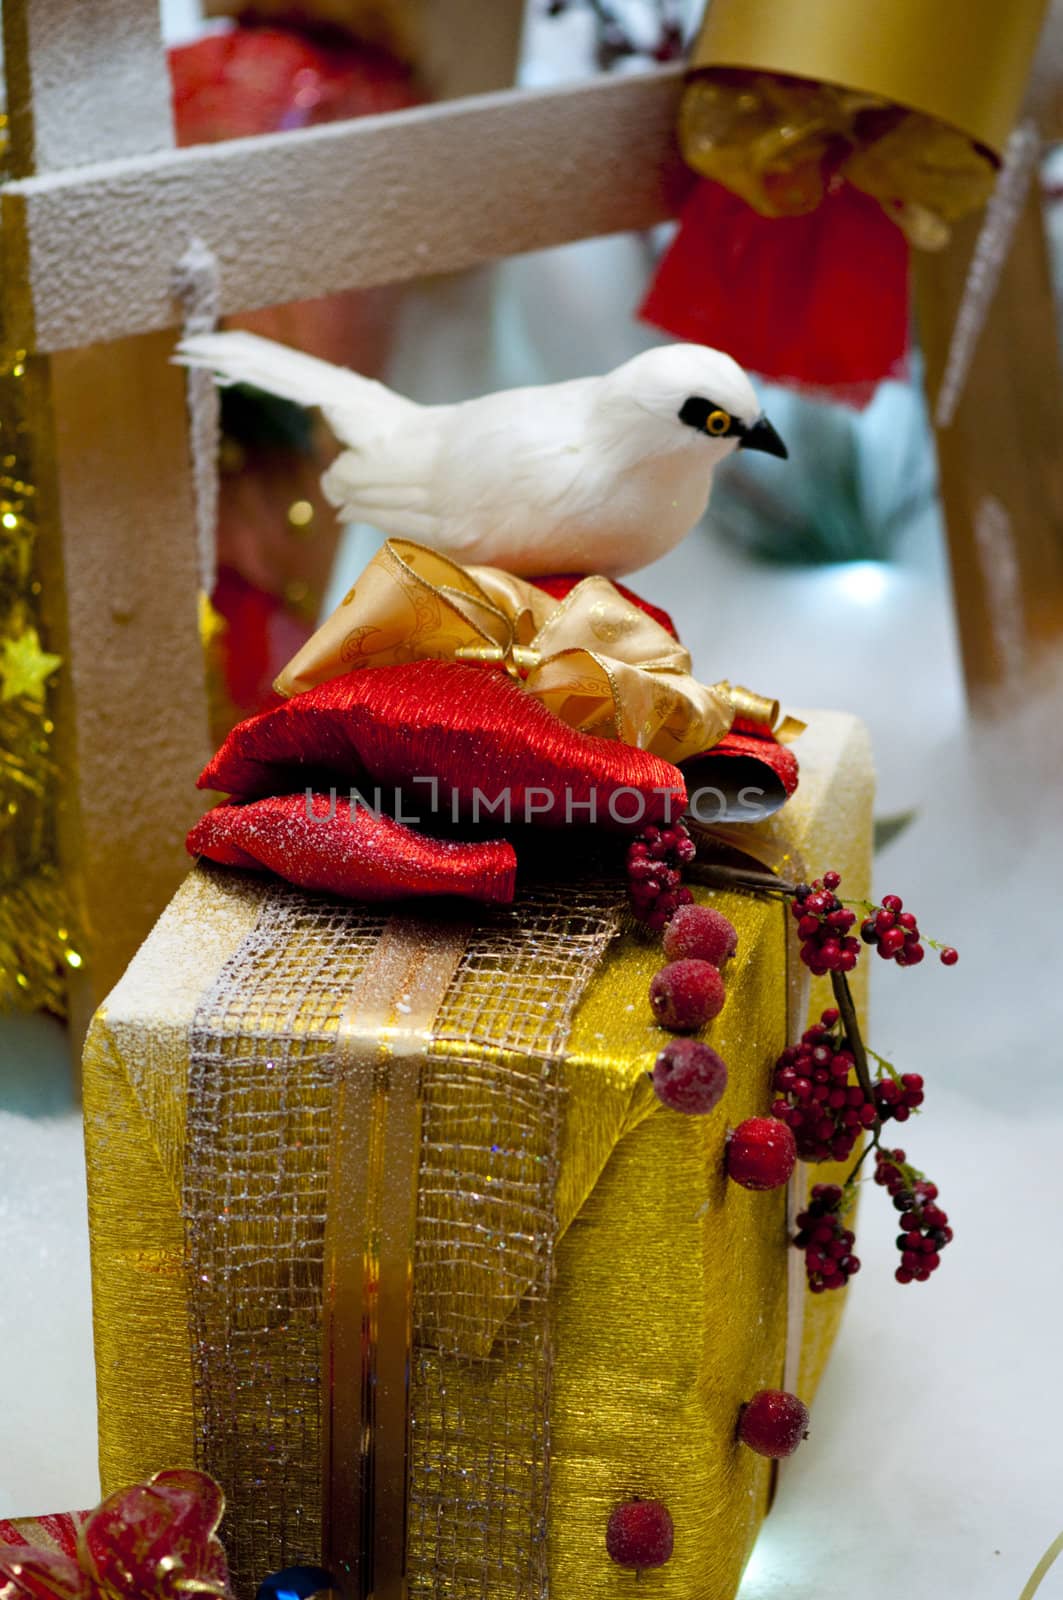 High resolution image. The white bird sits on a box.